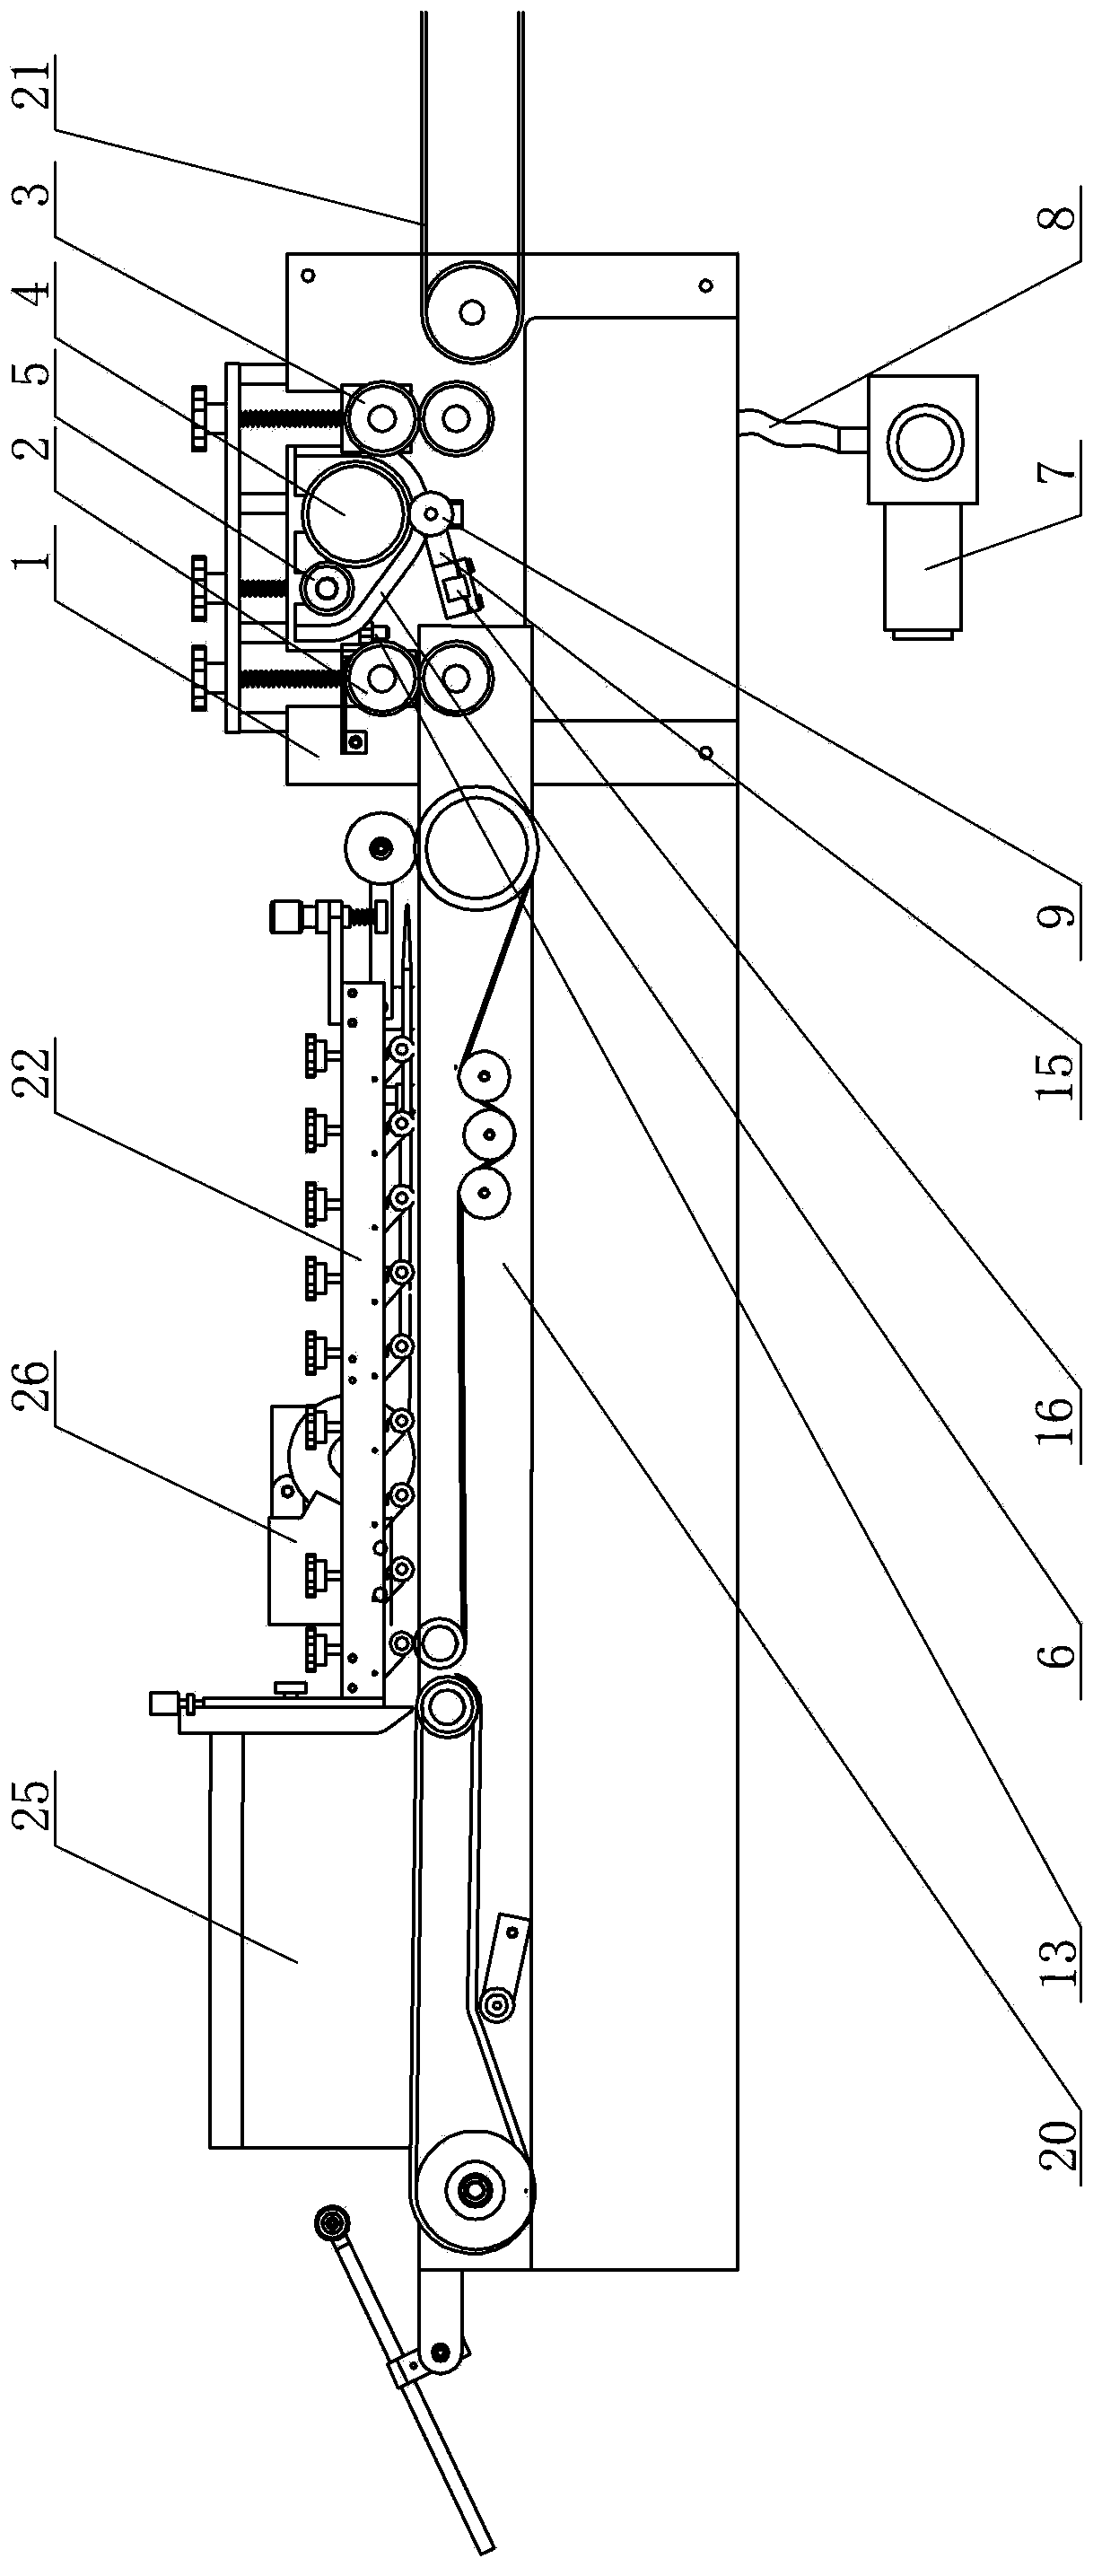 Spacing-adjustable gluing mechanism capable of keeping gluing face upwards